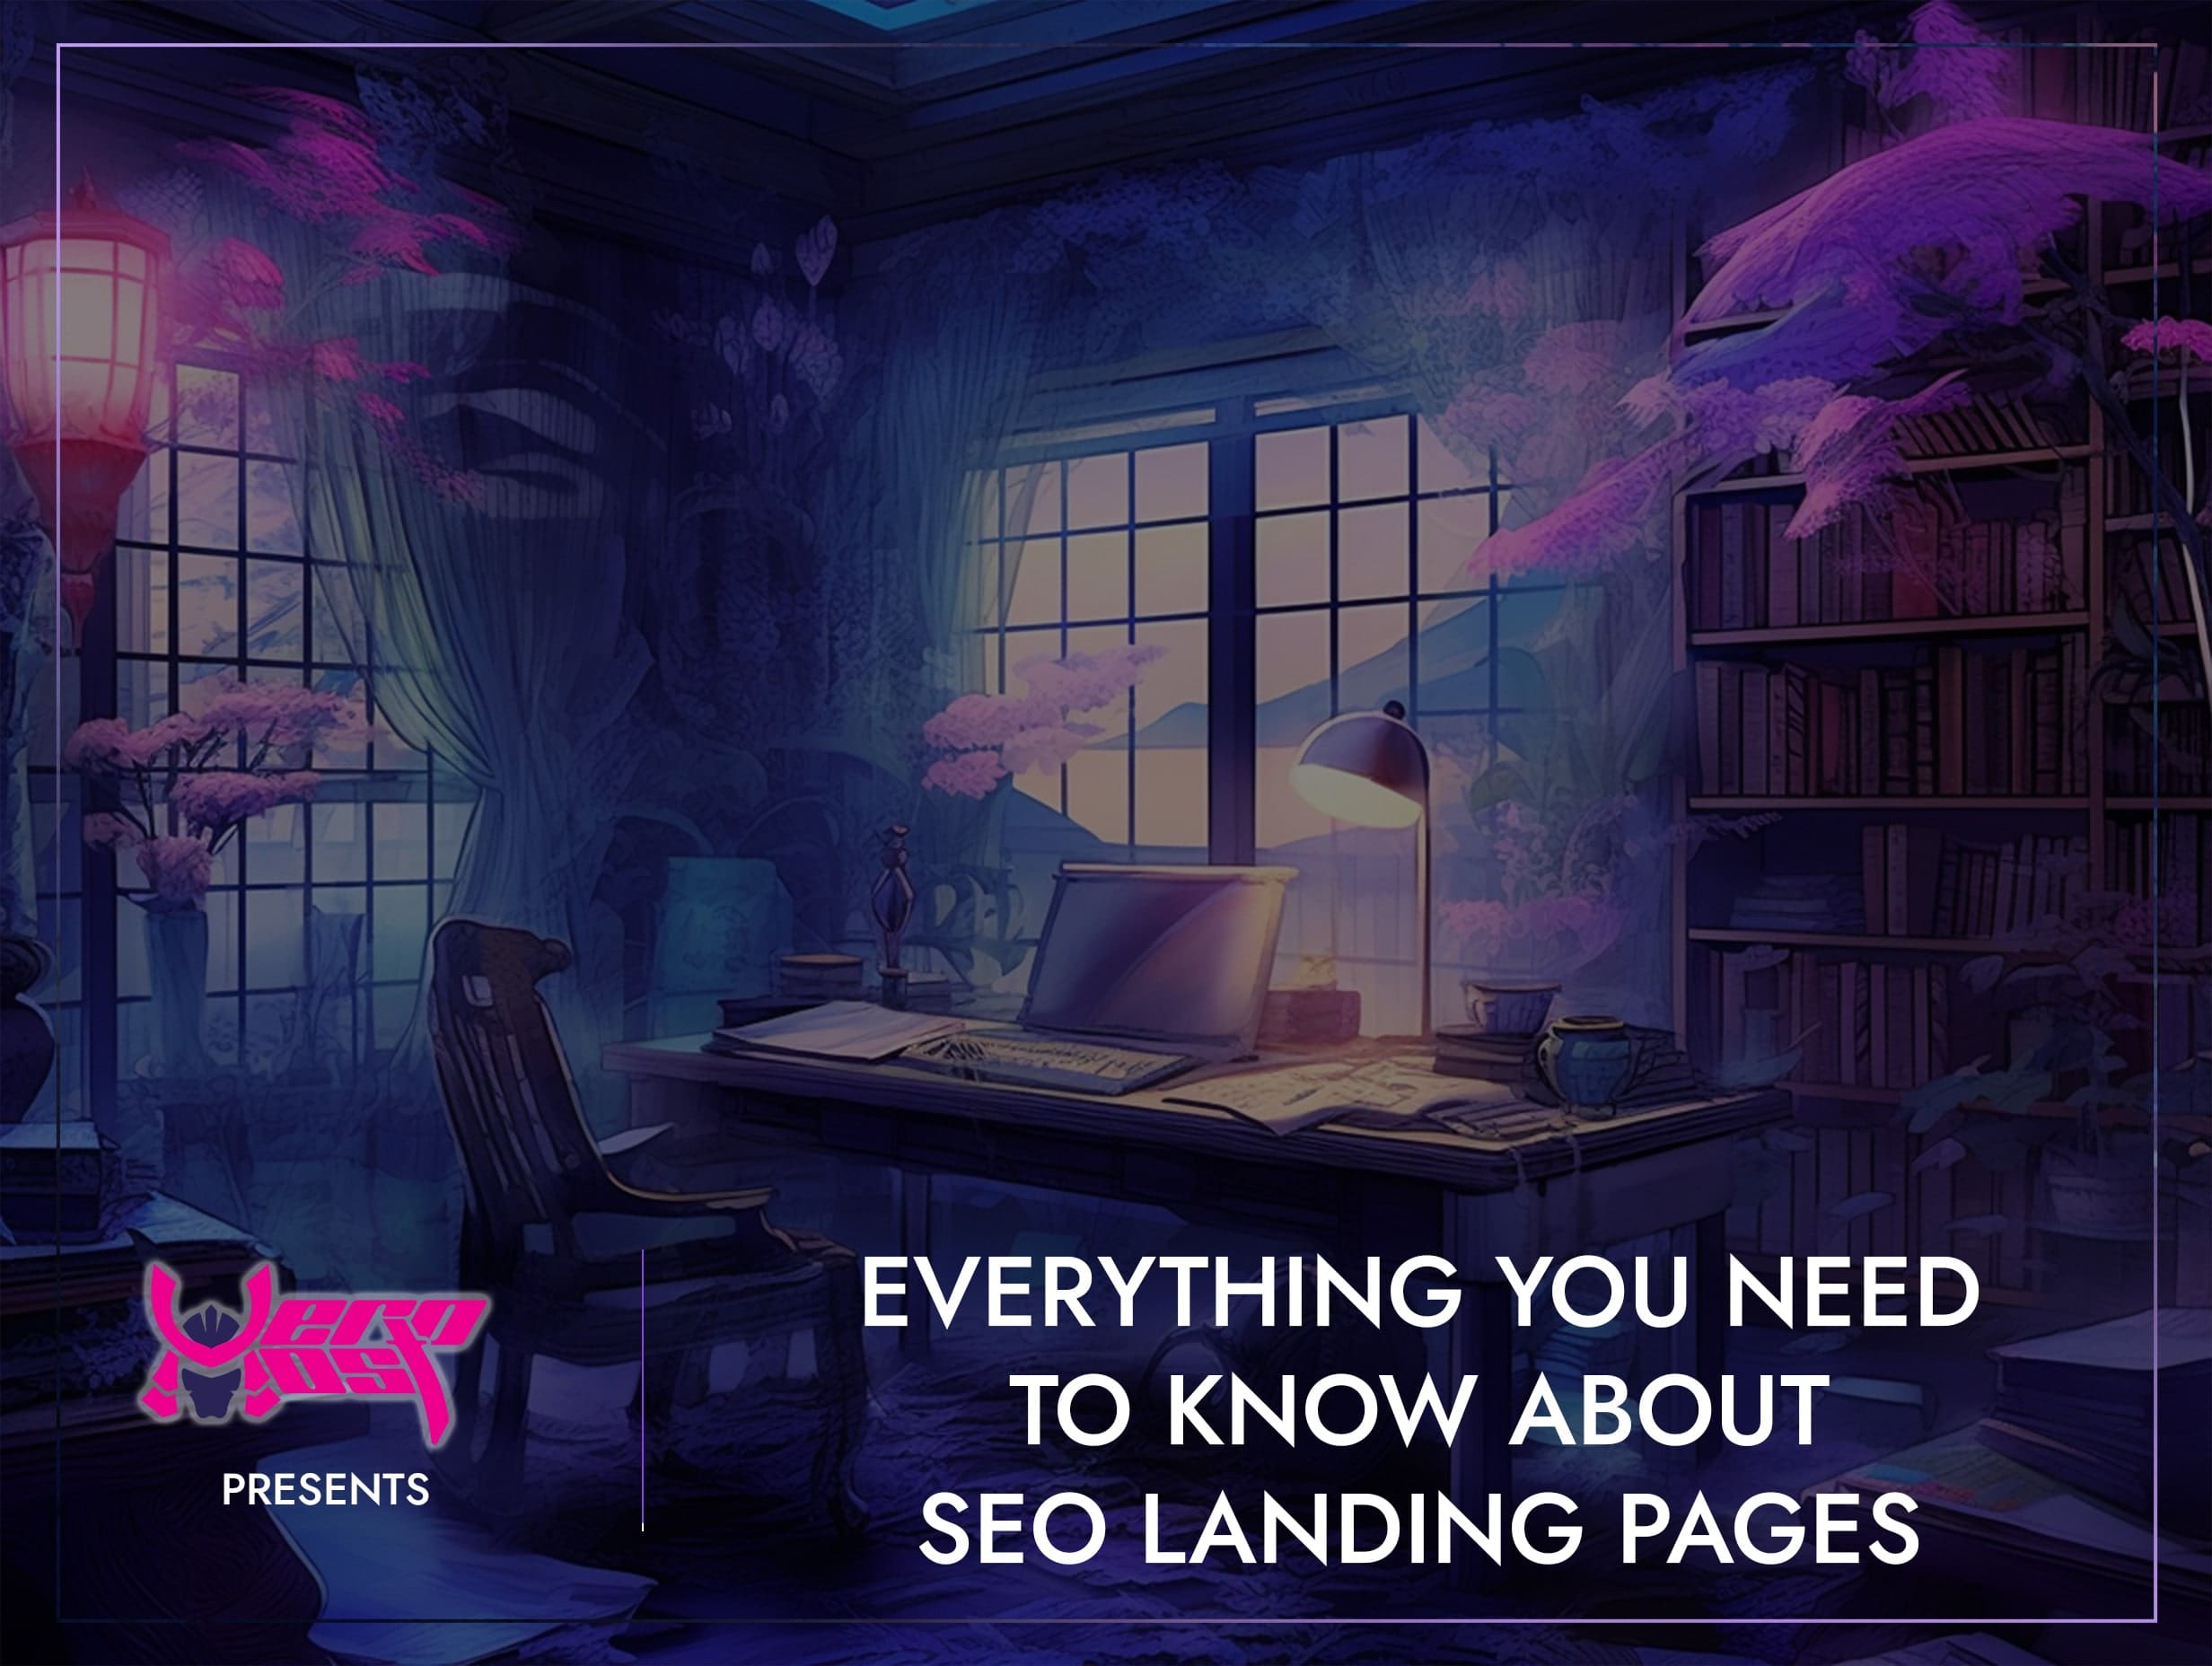 Everything You Need to Know About SEO Landing Pages